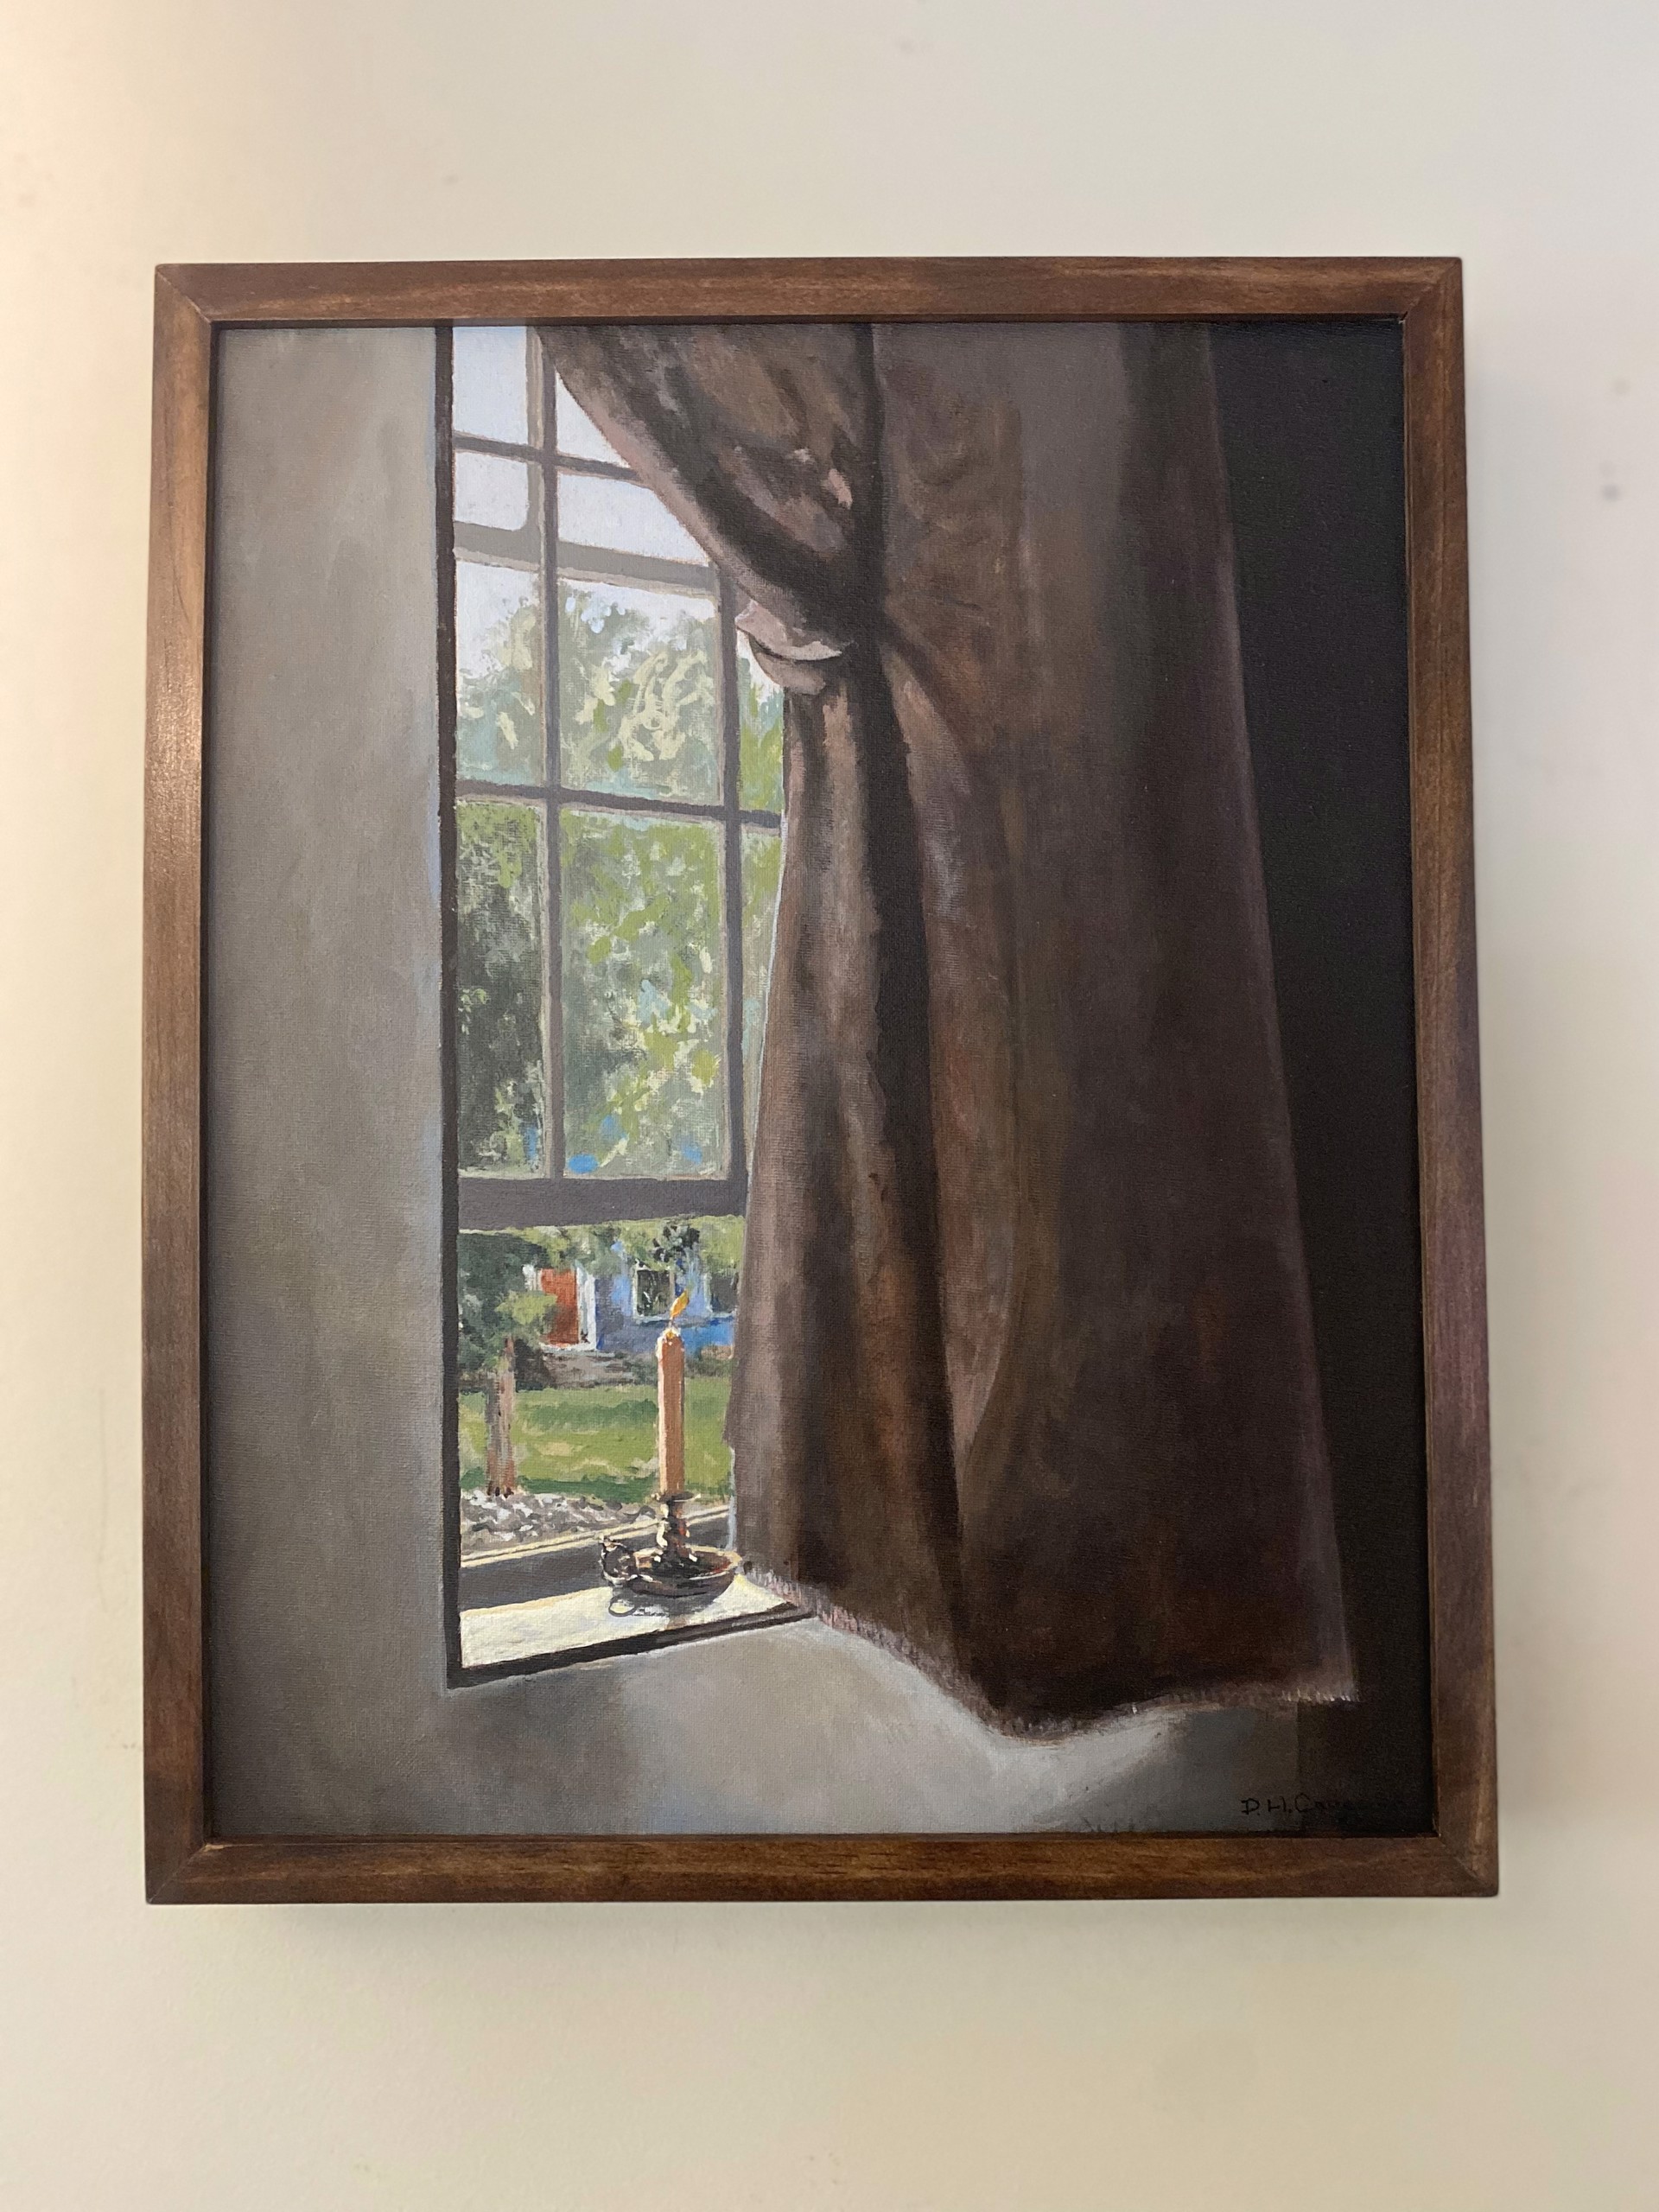 Candle in the Window by Douglas H. Caves Sr.